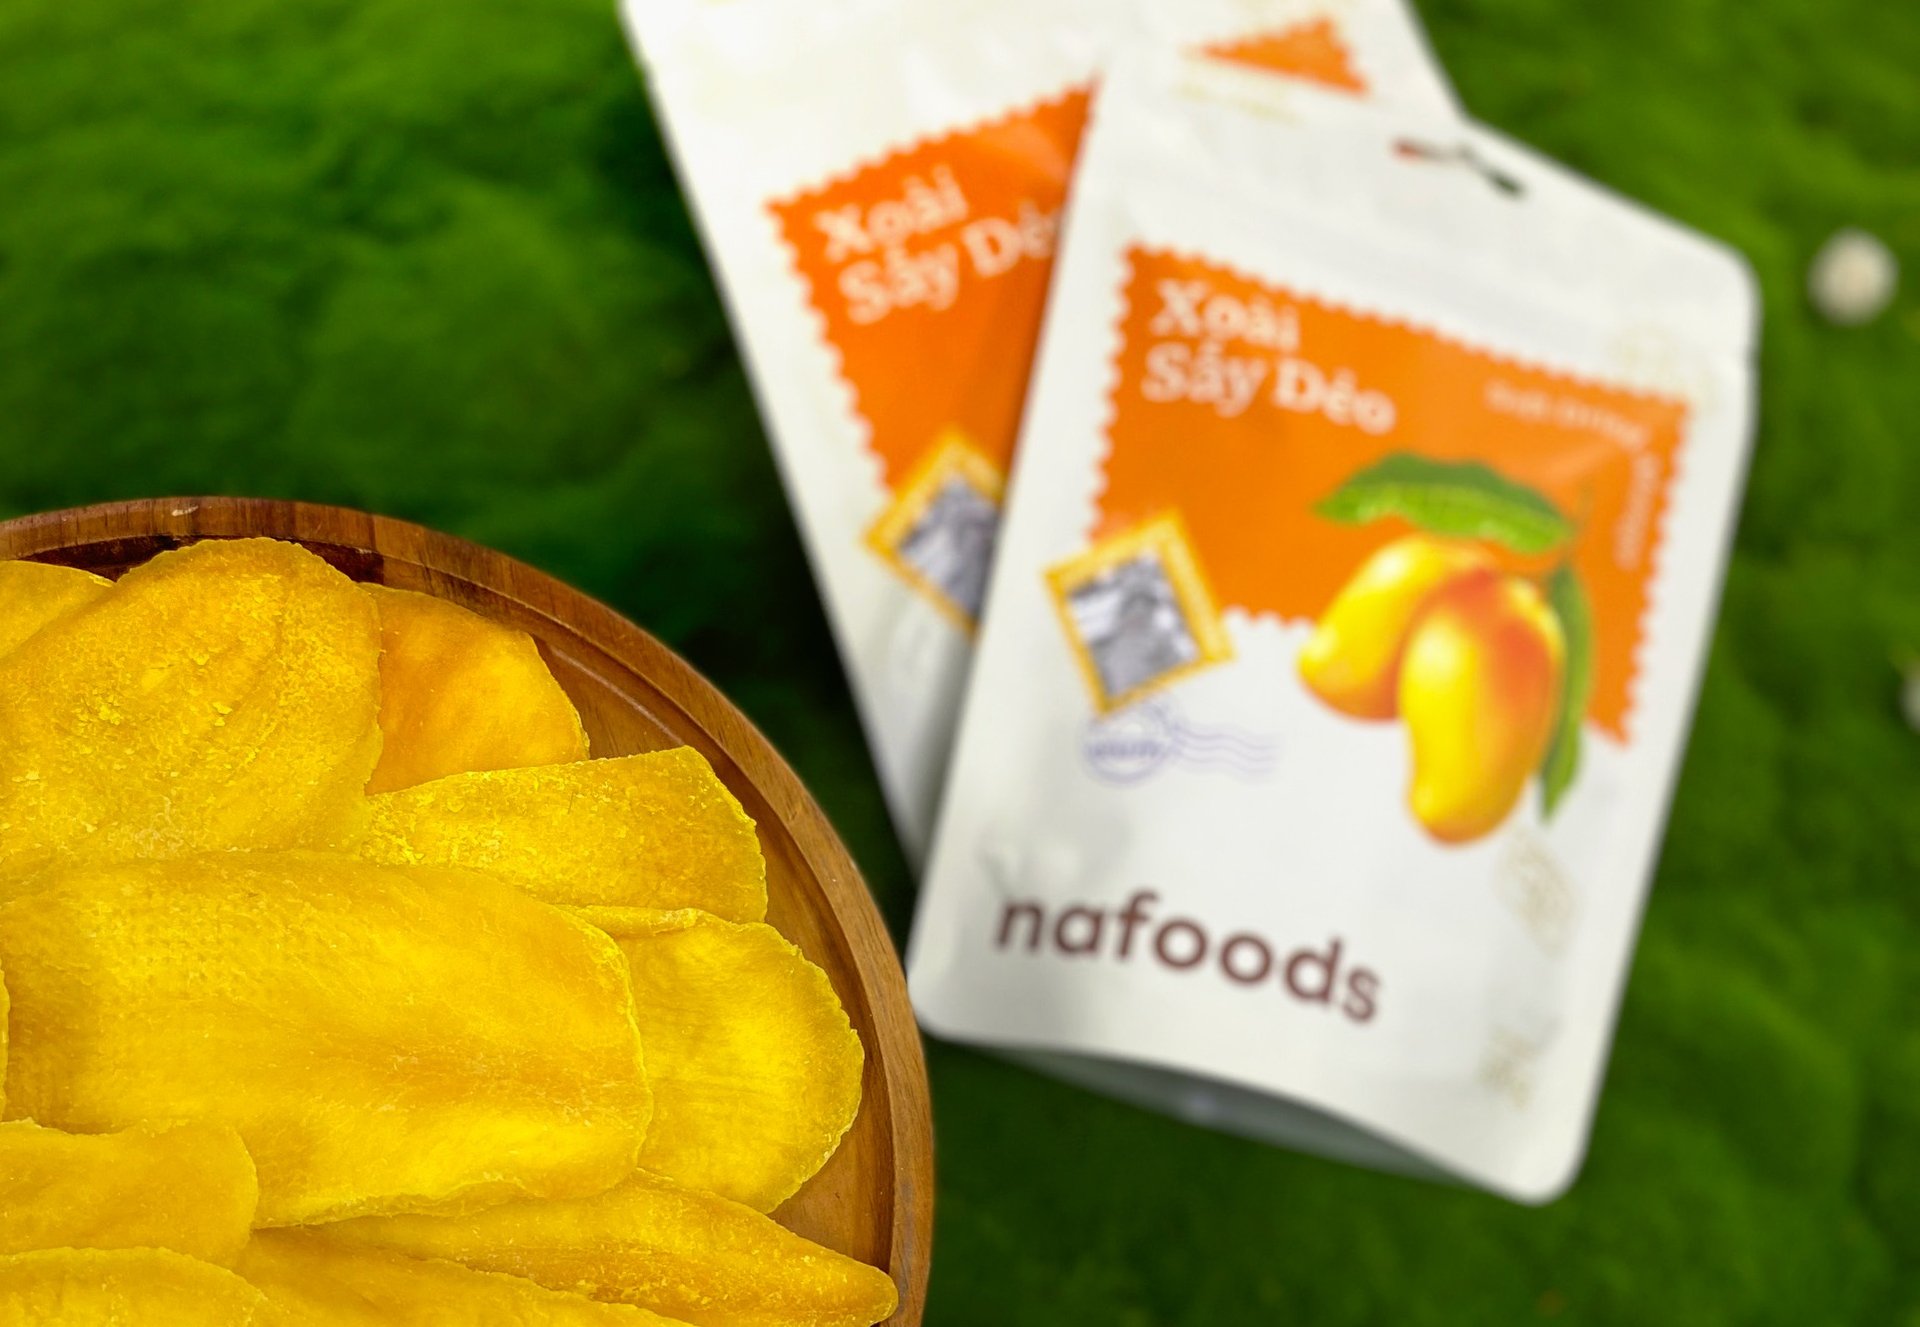 Dried mango products of Nafoods.